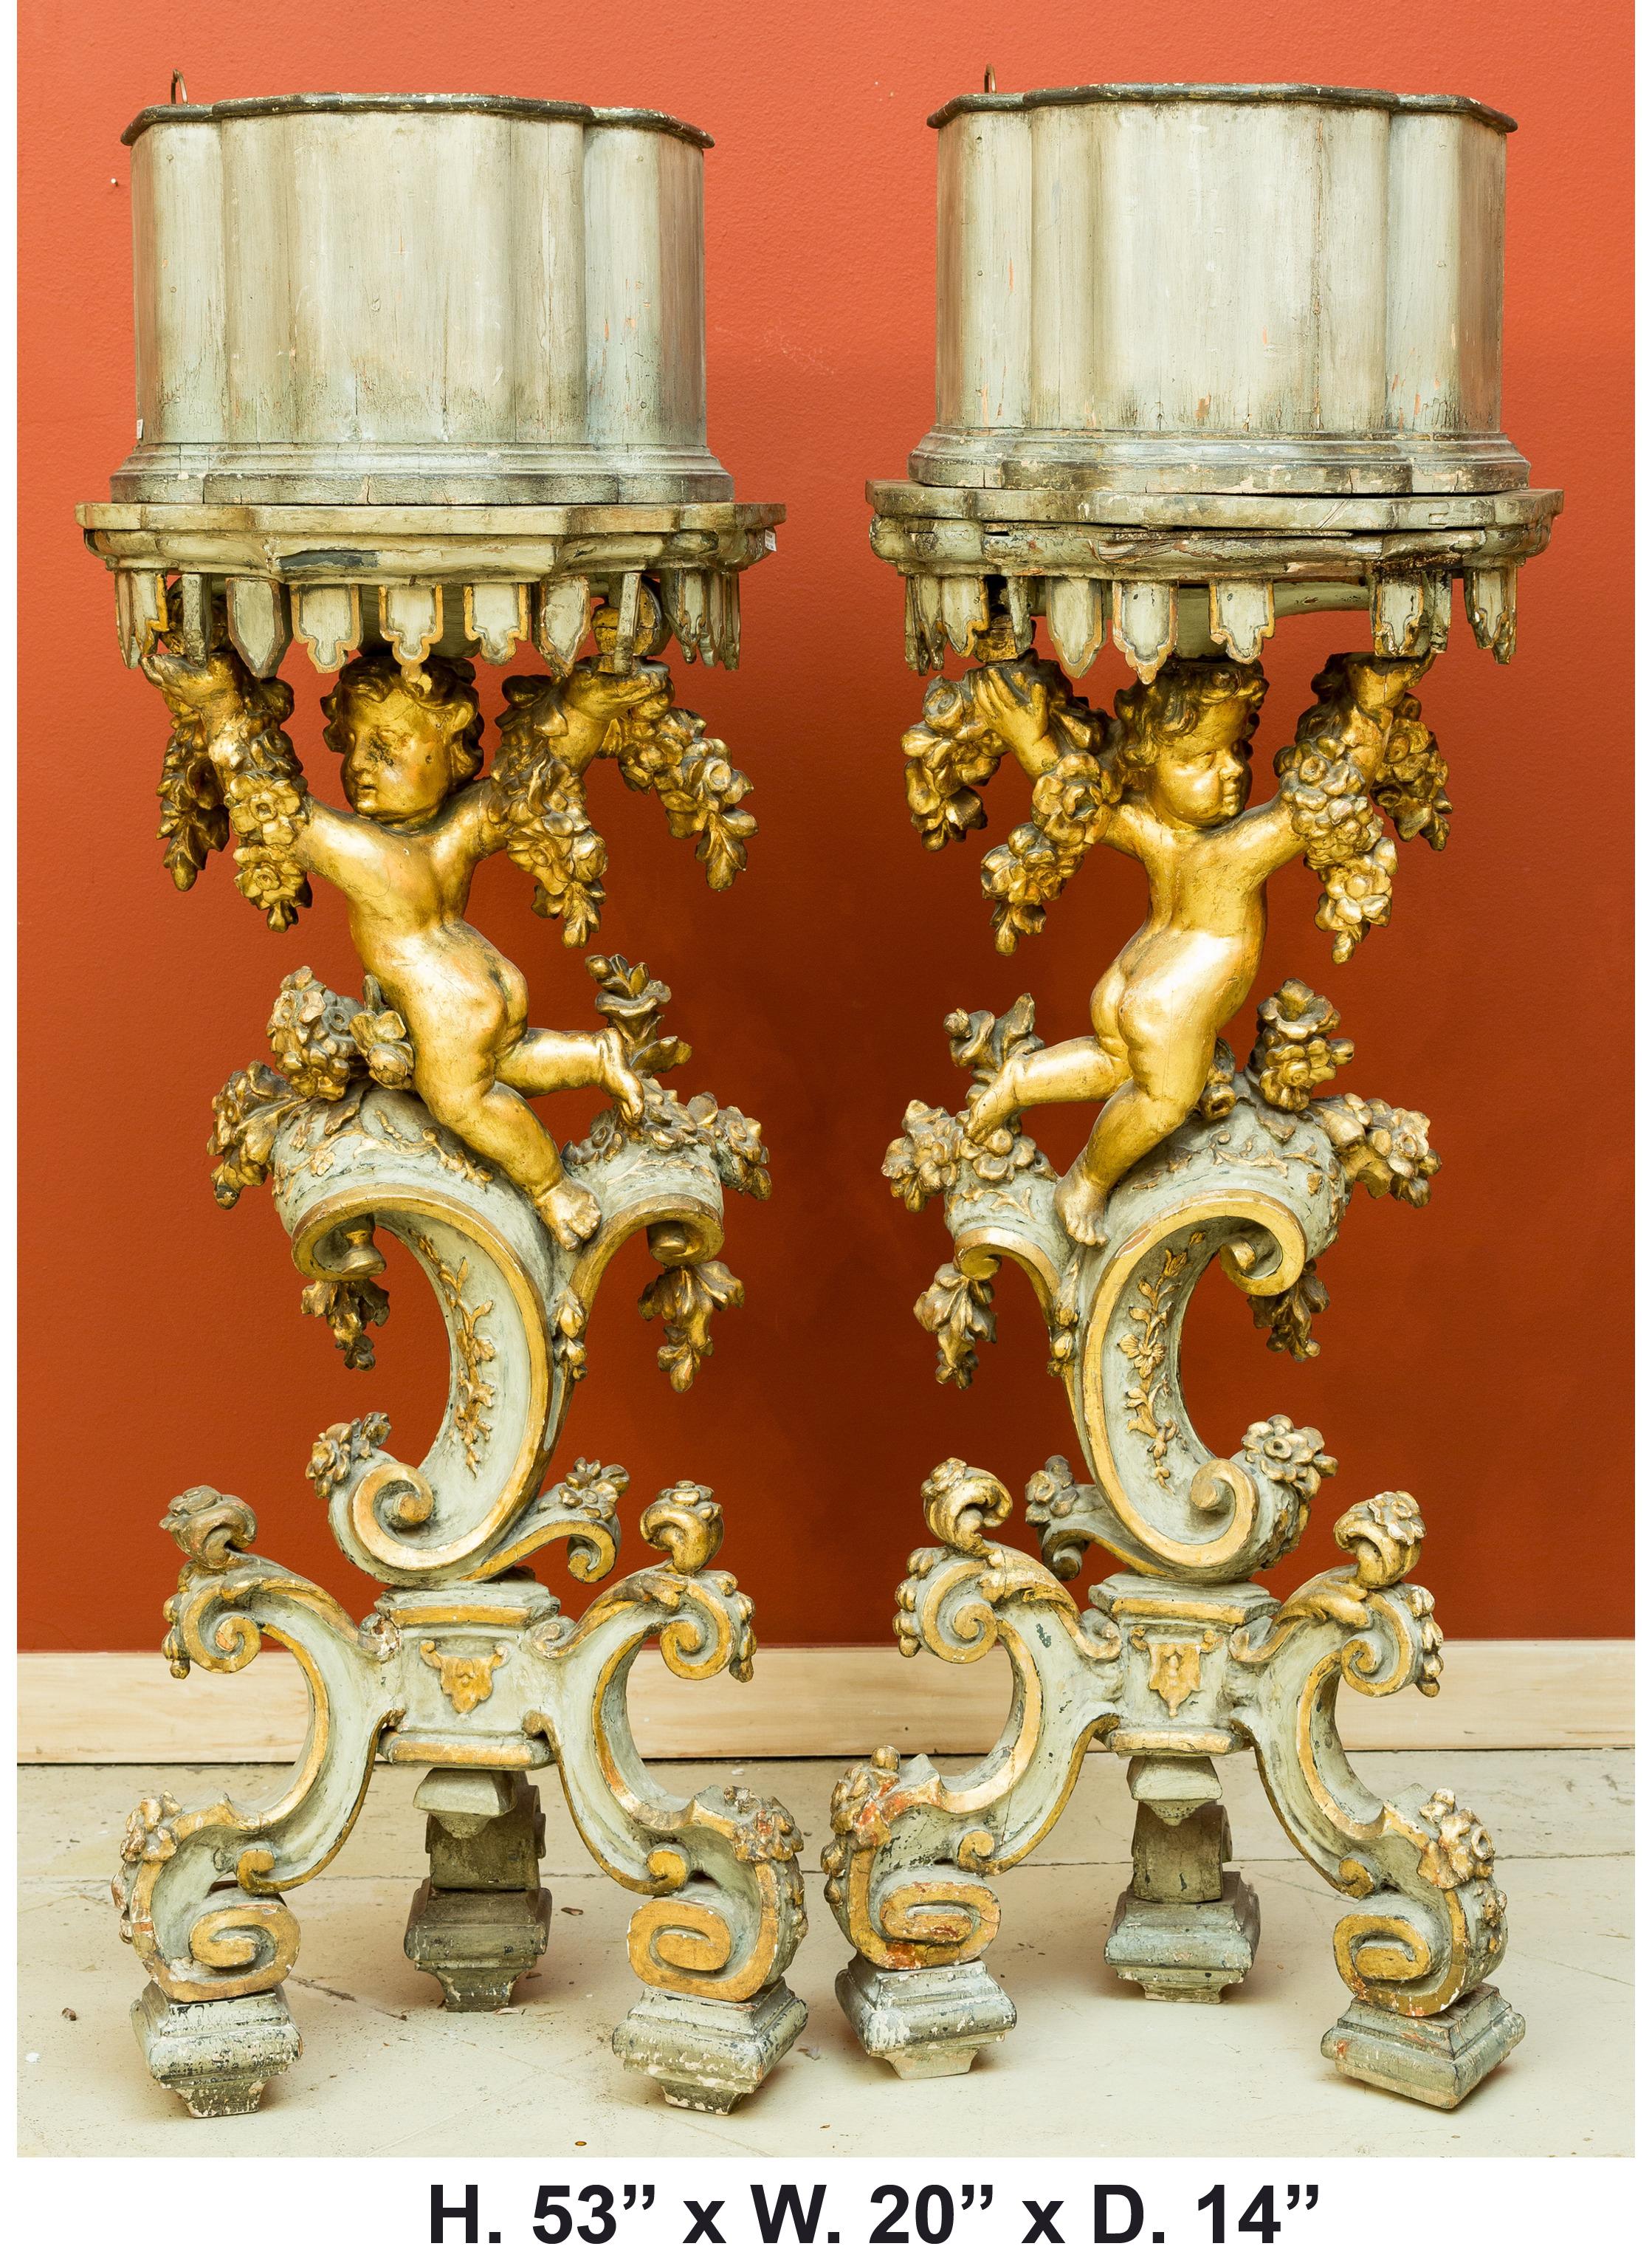 Attractive pair of Italian Baroque style jardinière pedestals, 19th century.
A shaped brass planter rests on top of a painted conforming platform, over a hand carved giltwood frolicking putti with foliate swags in each arm, raised on a parcel gilt